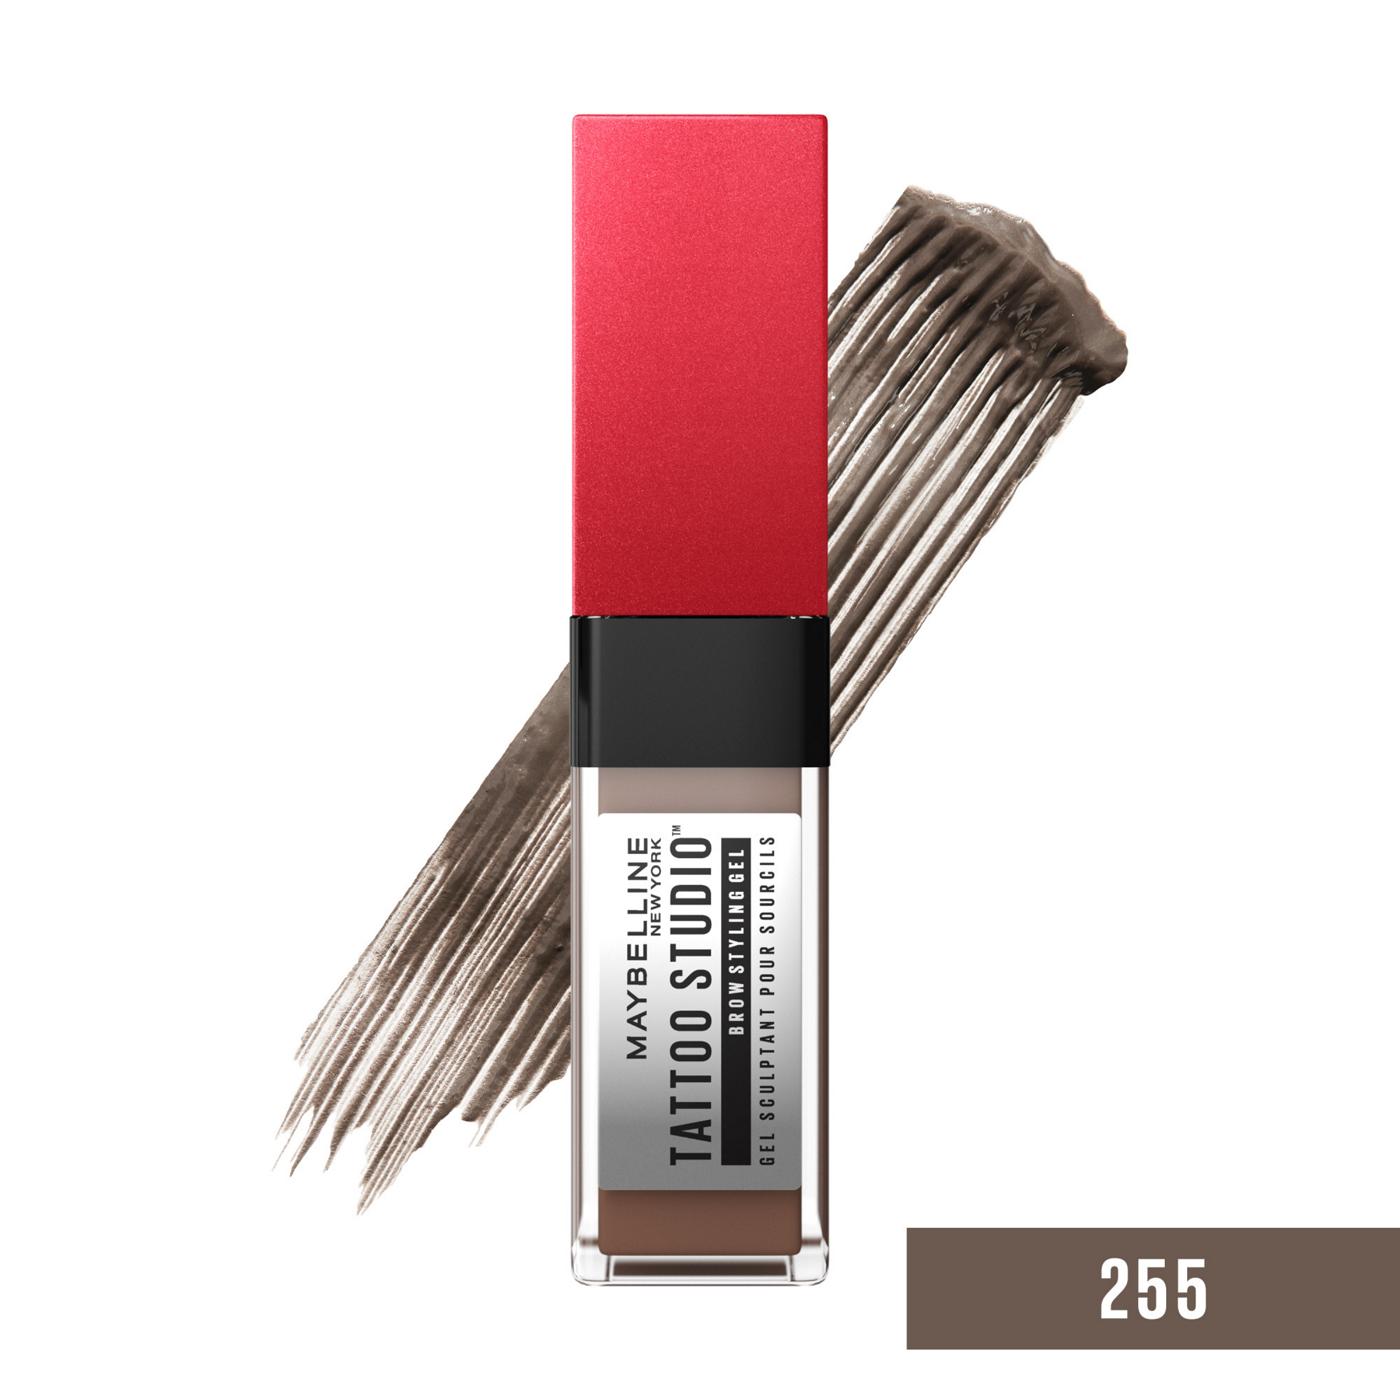 Maybelline Tattoo Studio Brow Styling Gel - Soft Brown; image 3 of 9